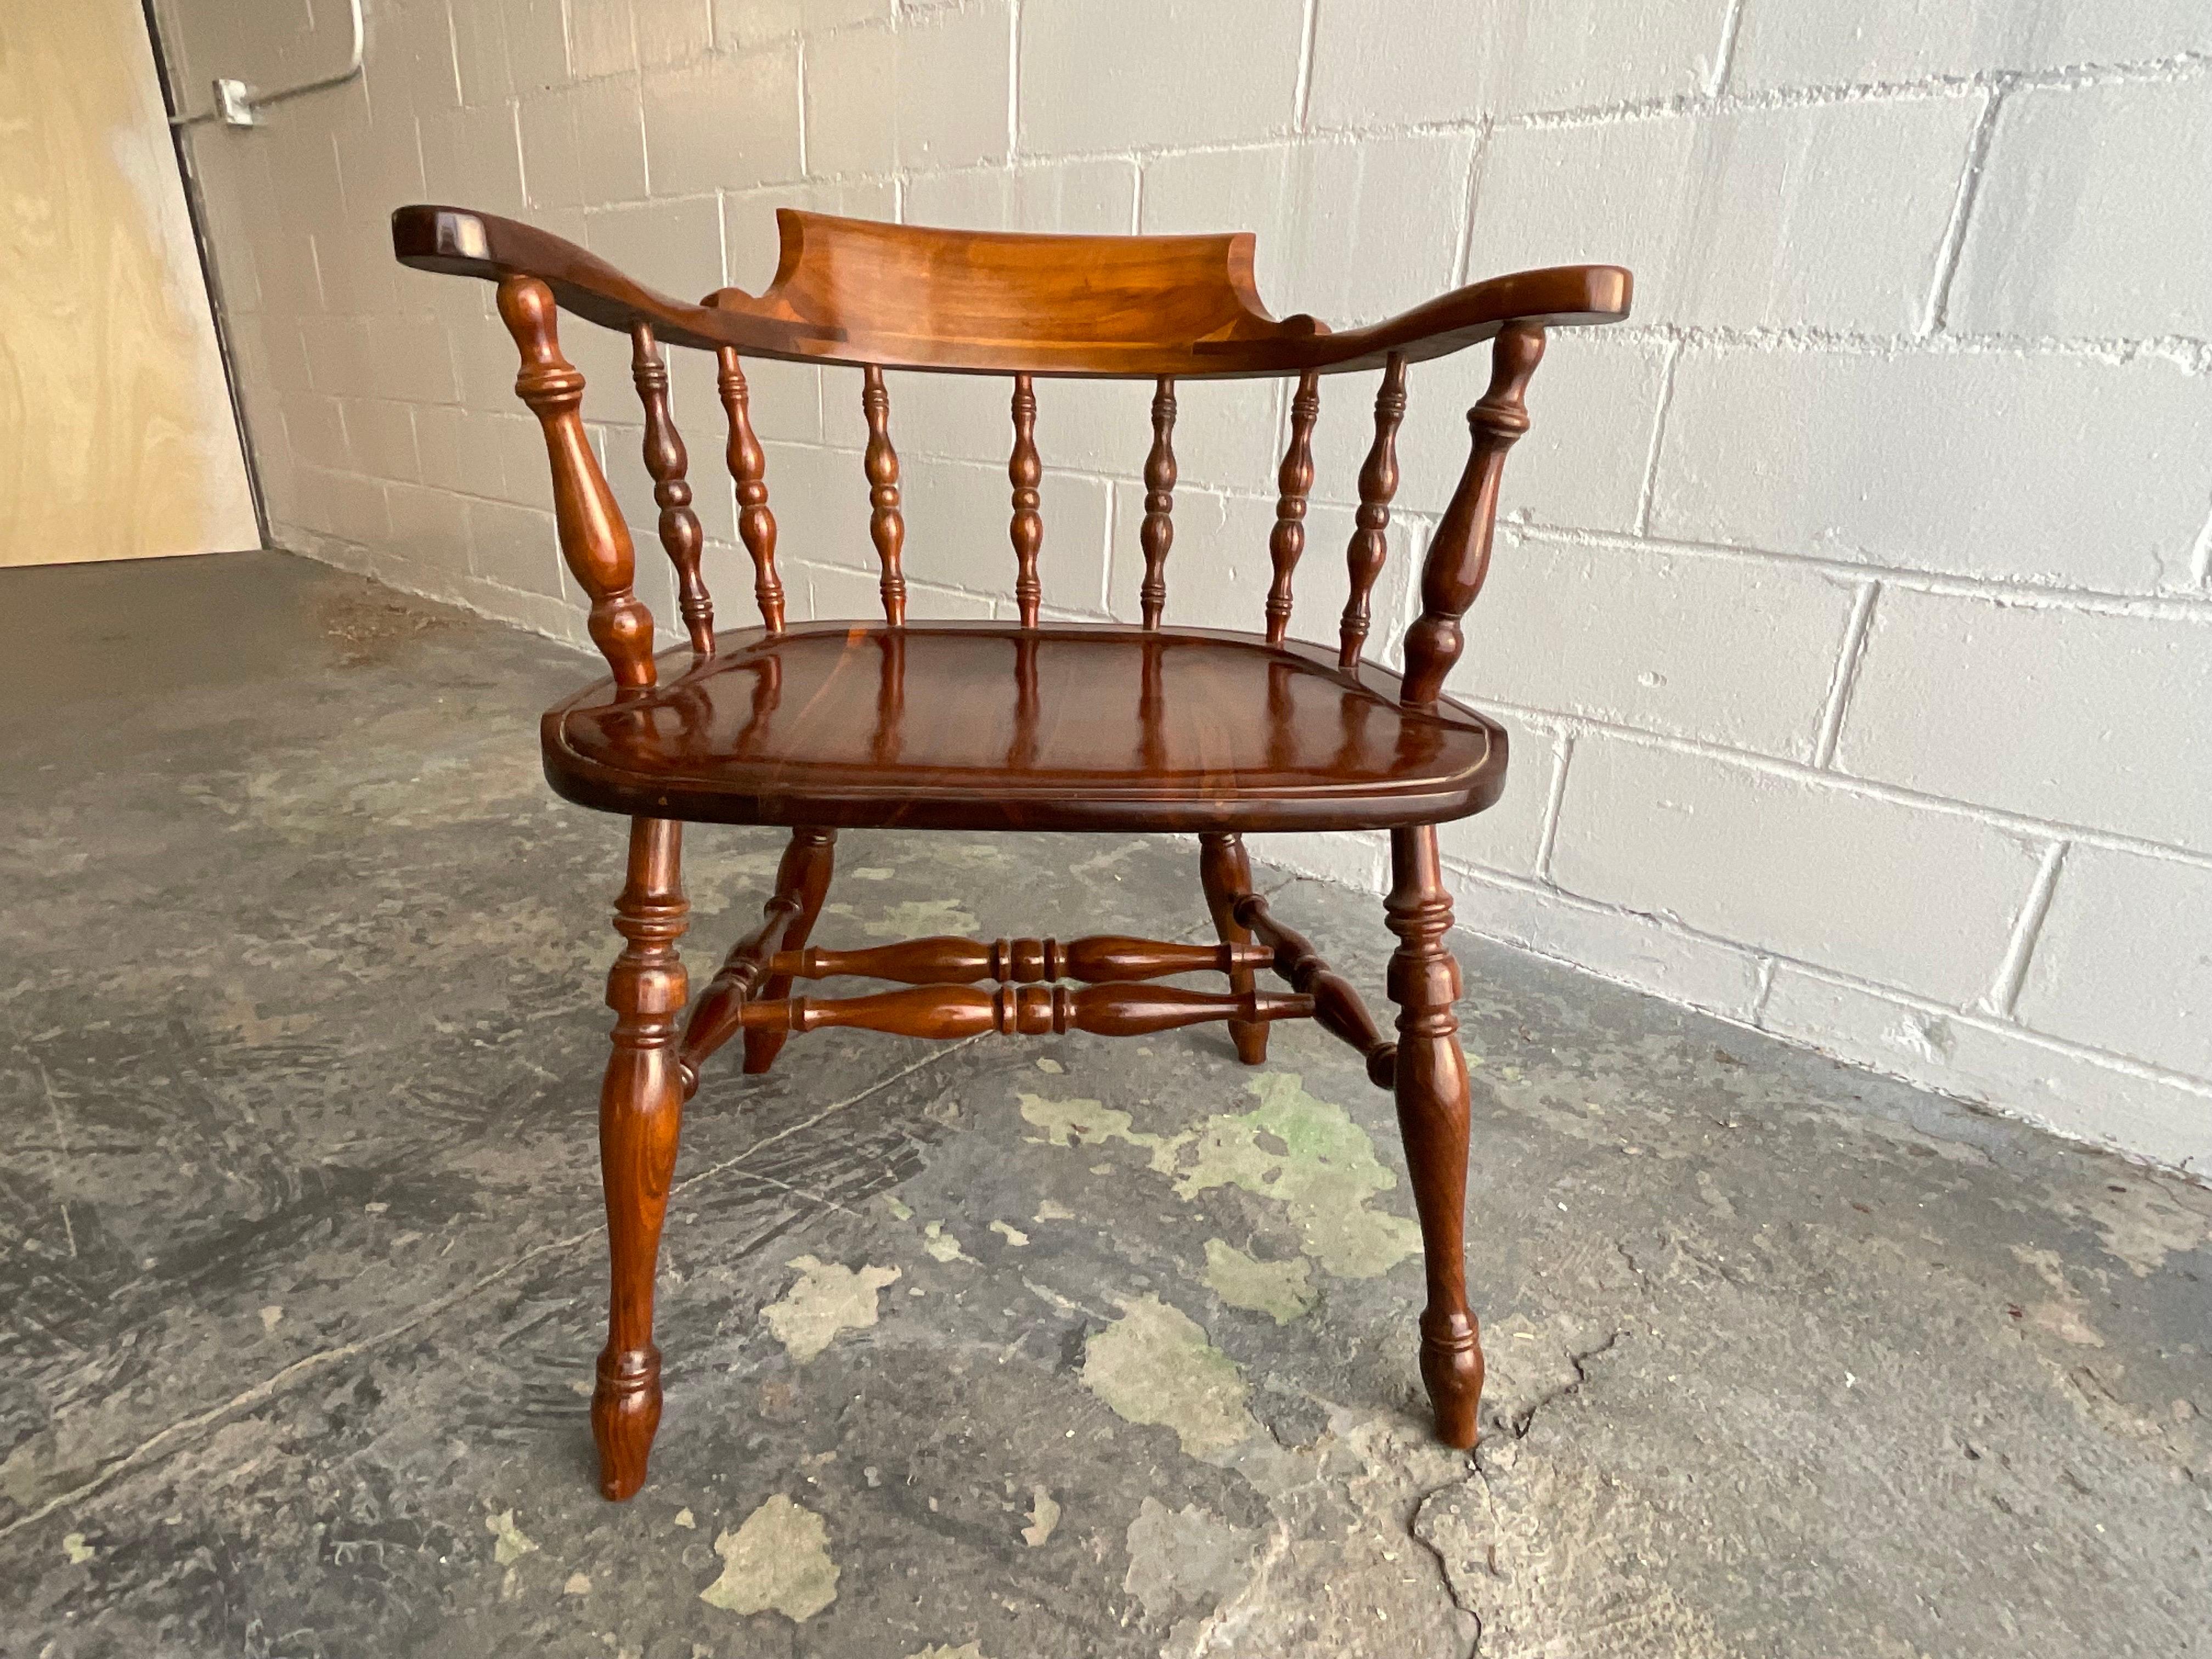 Victorian Studio-Made Captain’s Chairs in American Black Walnut, Winged Foot-2020 For Sale